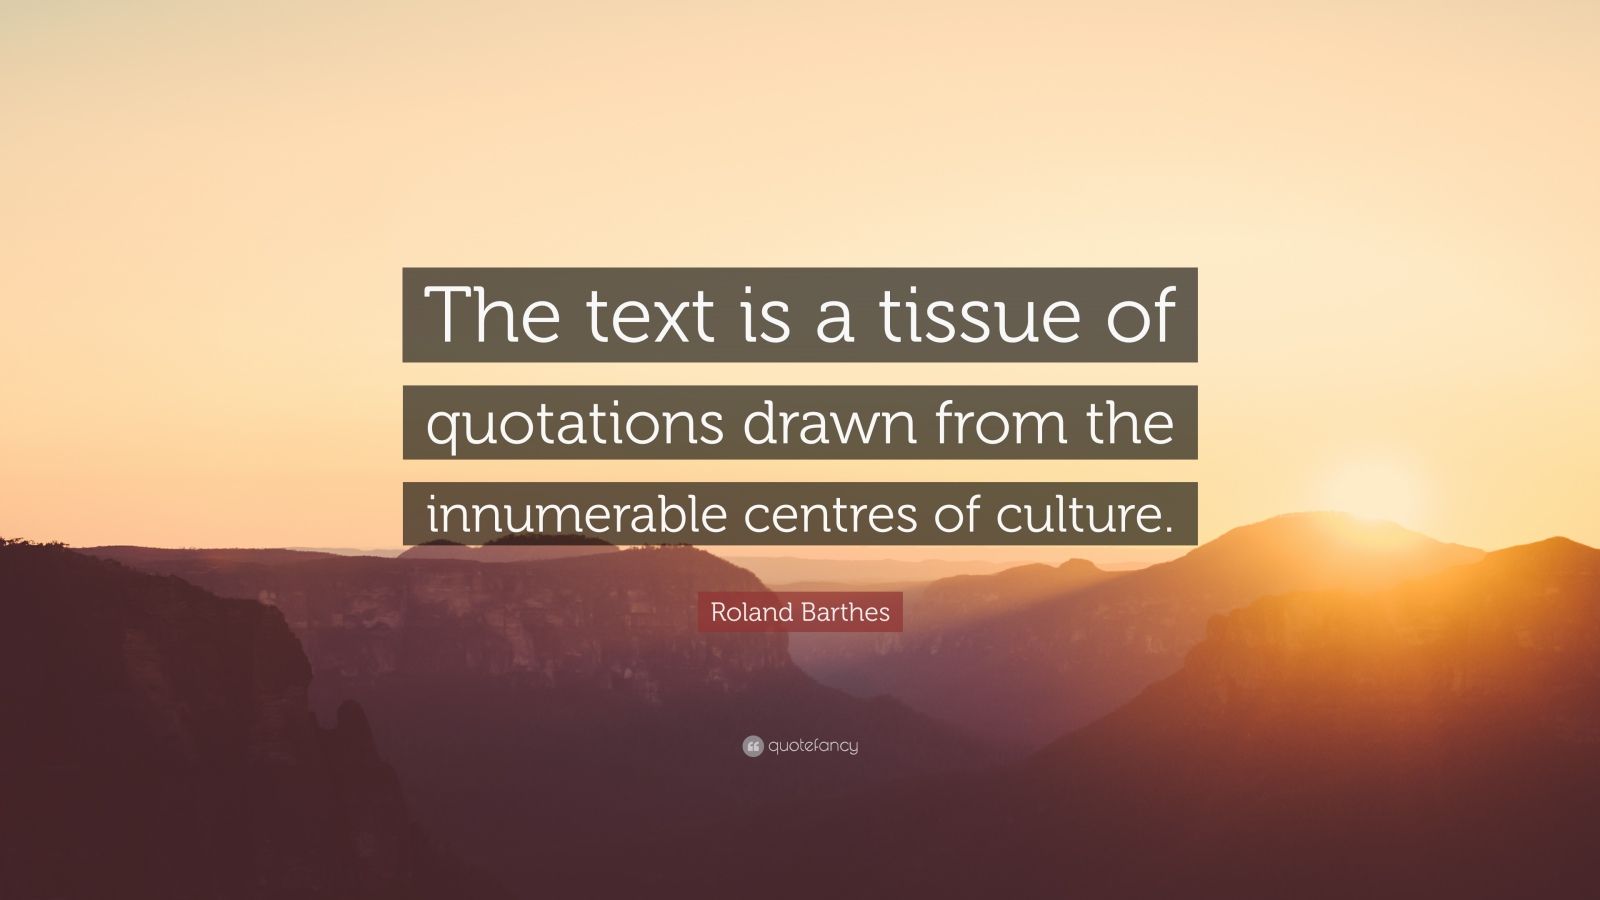 The Pleasure of the Text by Roland Barthes